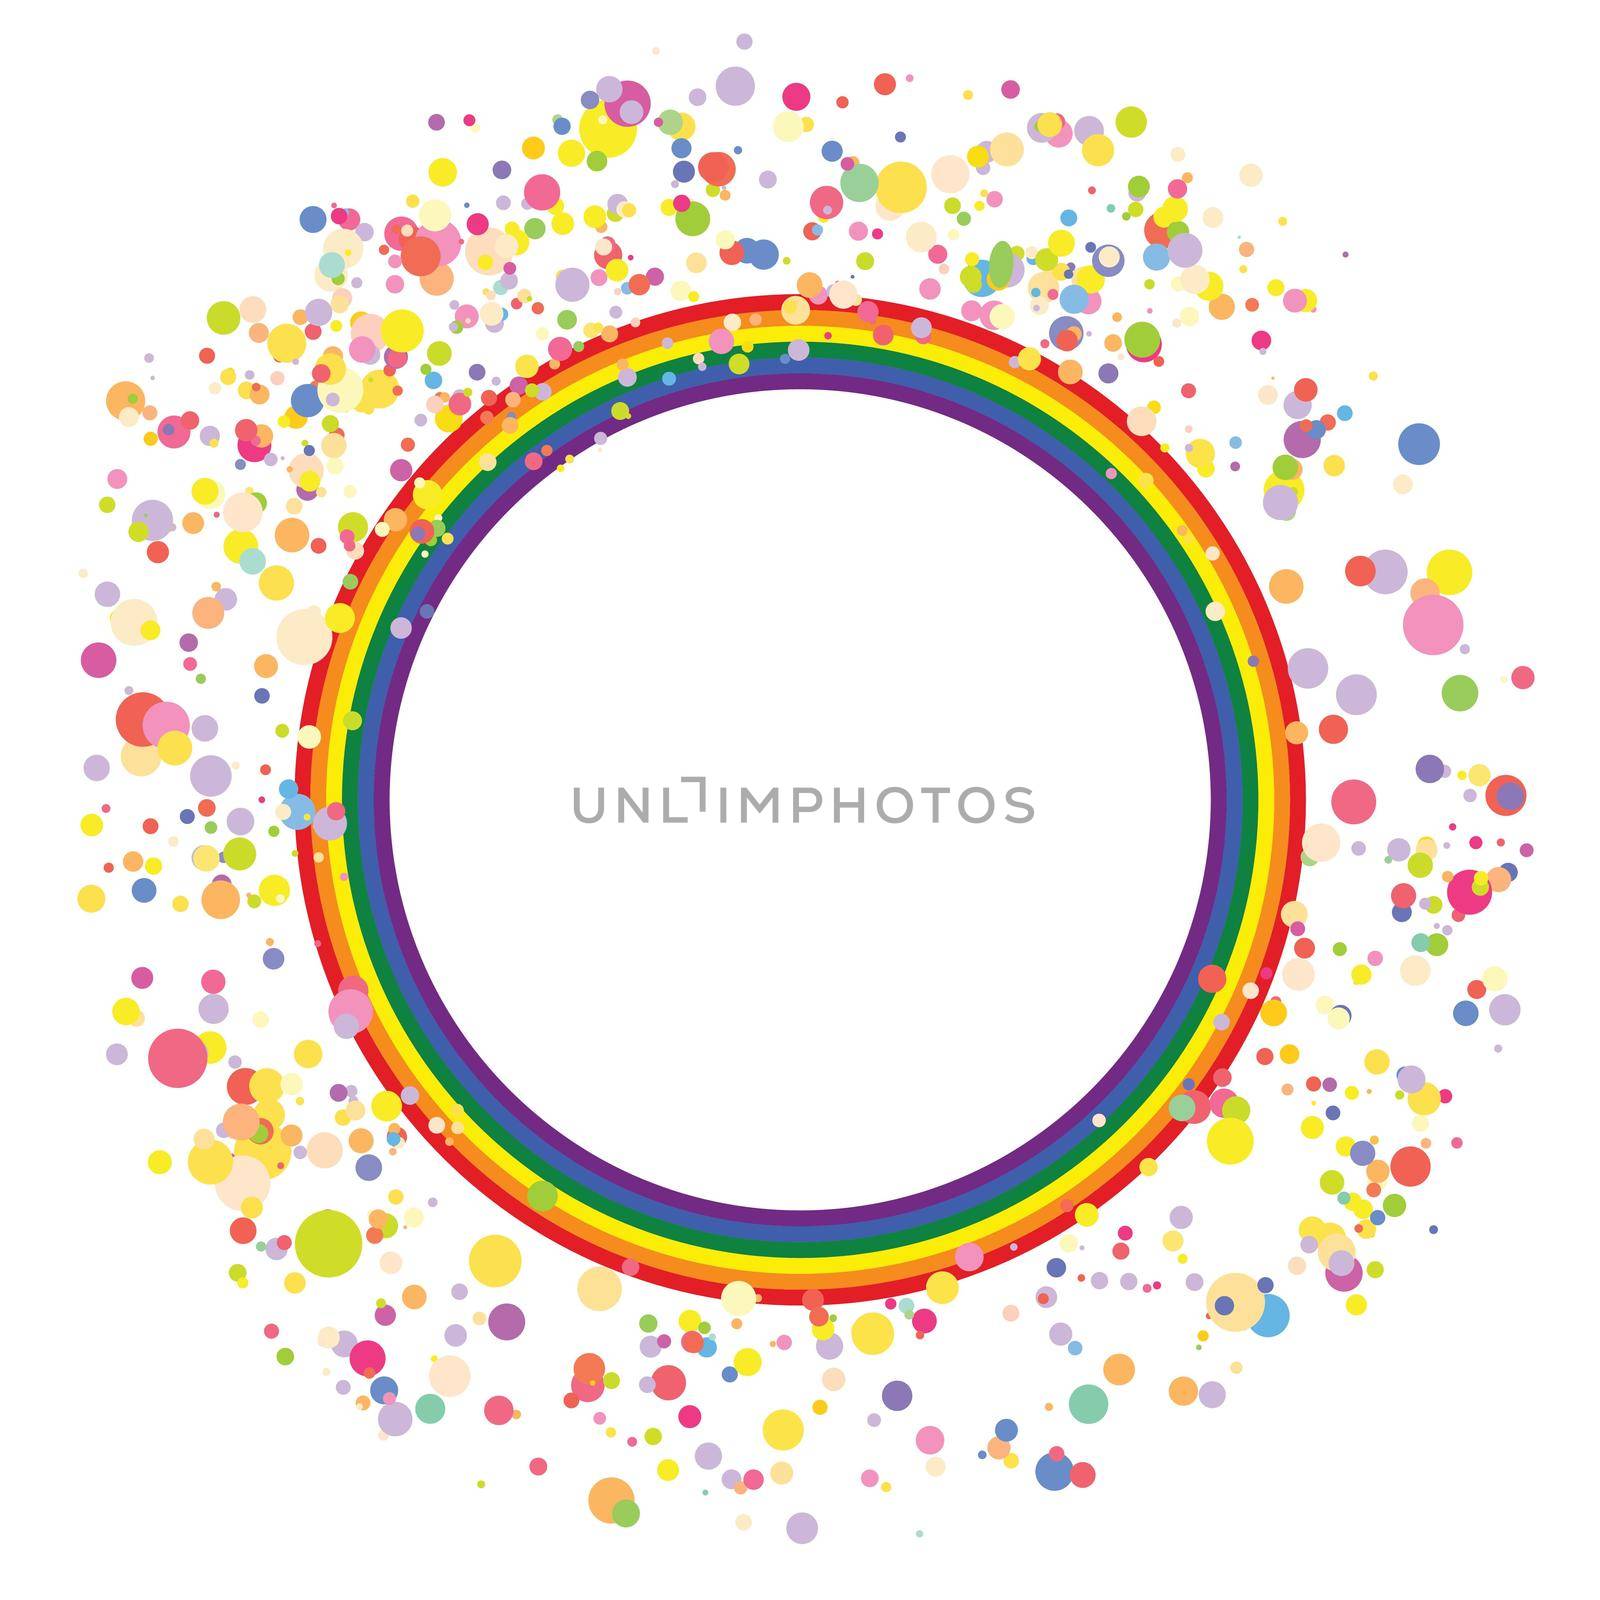 Flag LGBT icon, round frame with confetti. Template design, vector illustration. Love wins. LGBT symbol in rainbow colors. Gay pride collection by allaku